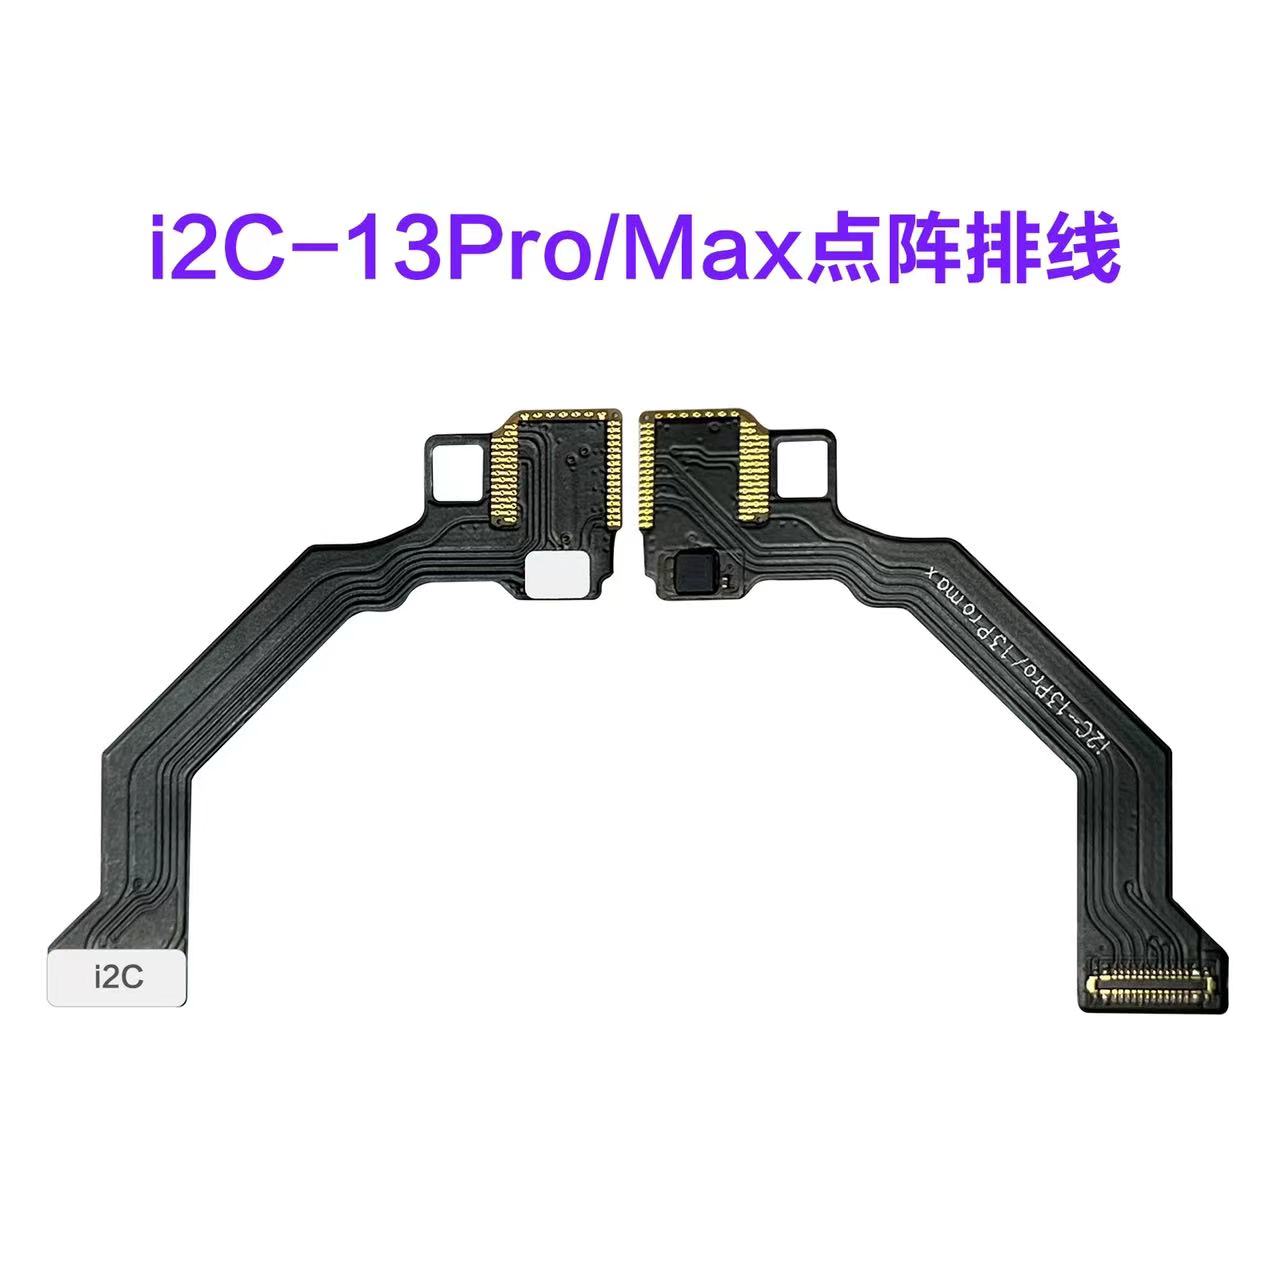 i2C Face ID Dot-Matrix Repair Tool with IC and Flex Cables